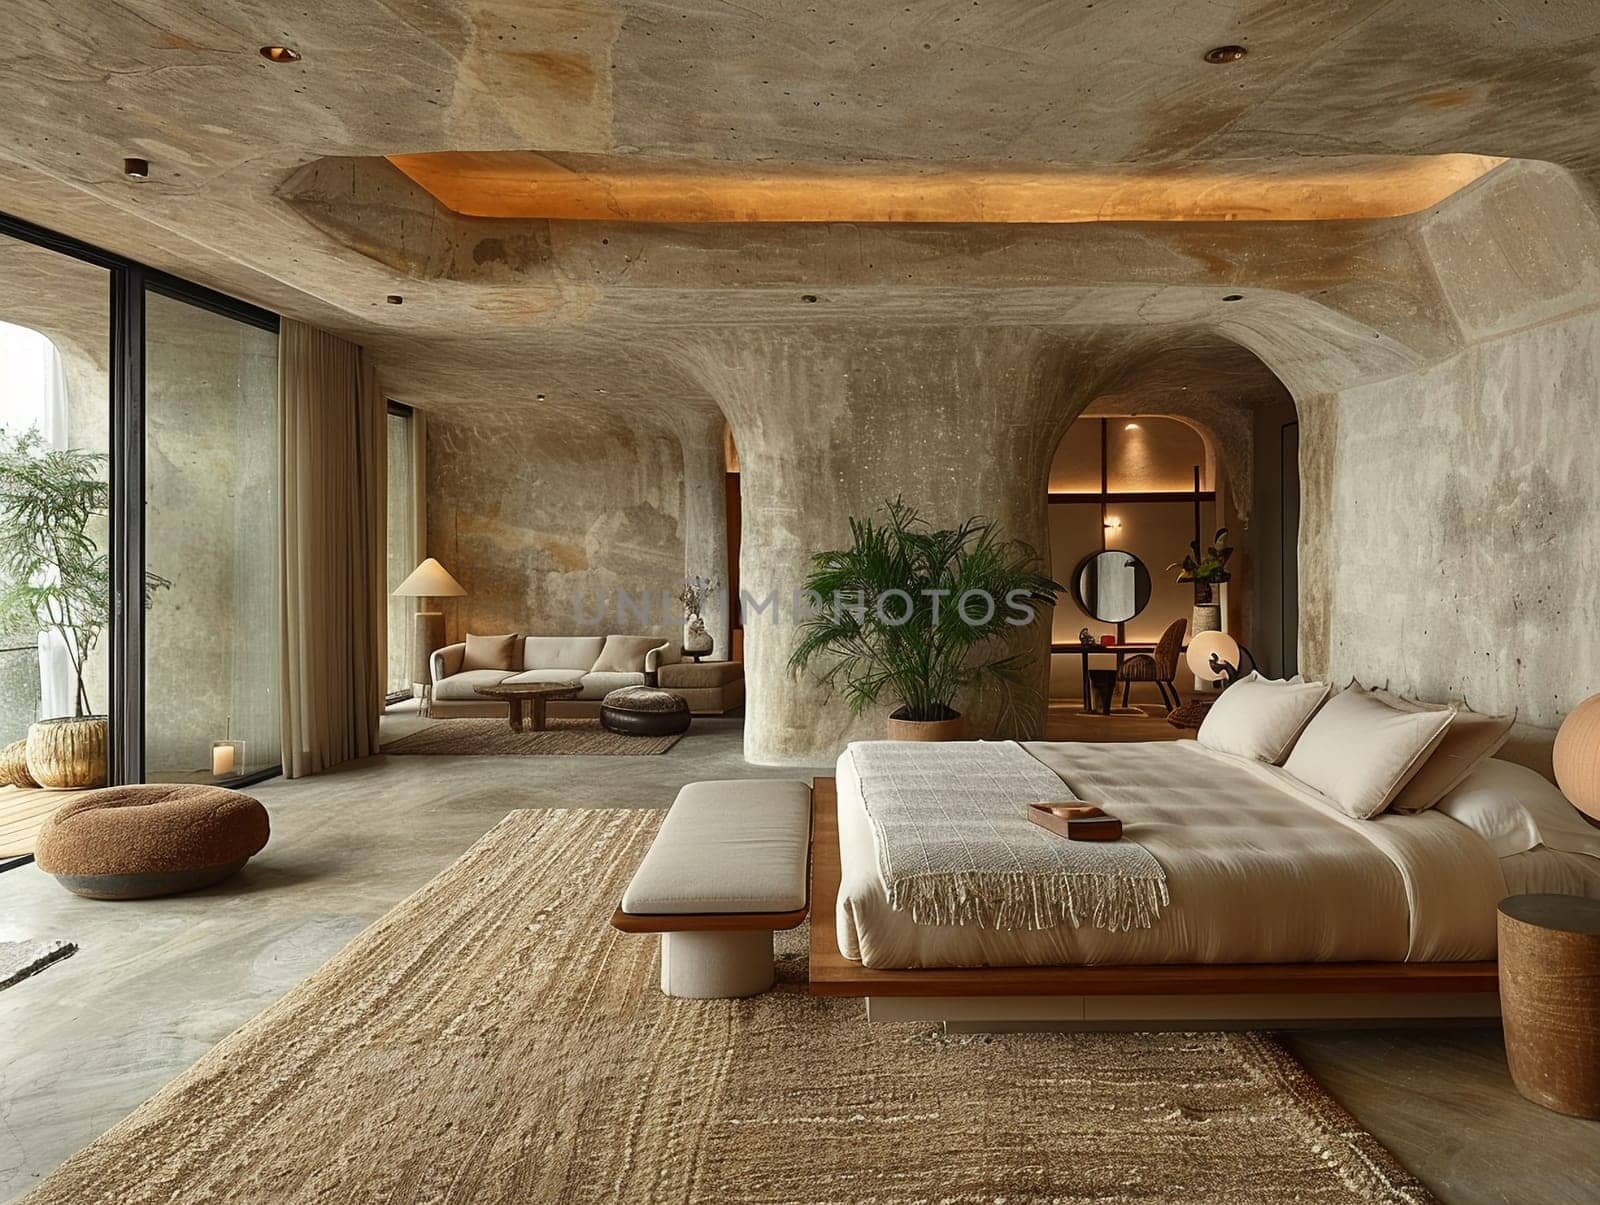 Understated luxury hotel suite with subtle textures and neutral tones by Benzoix